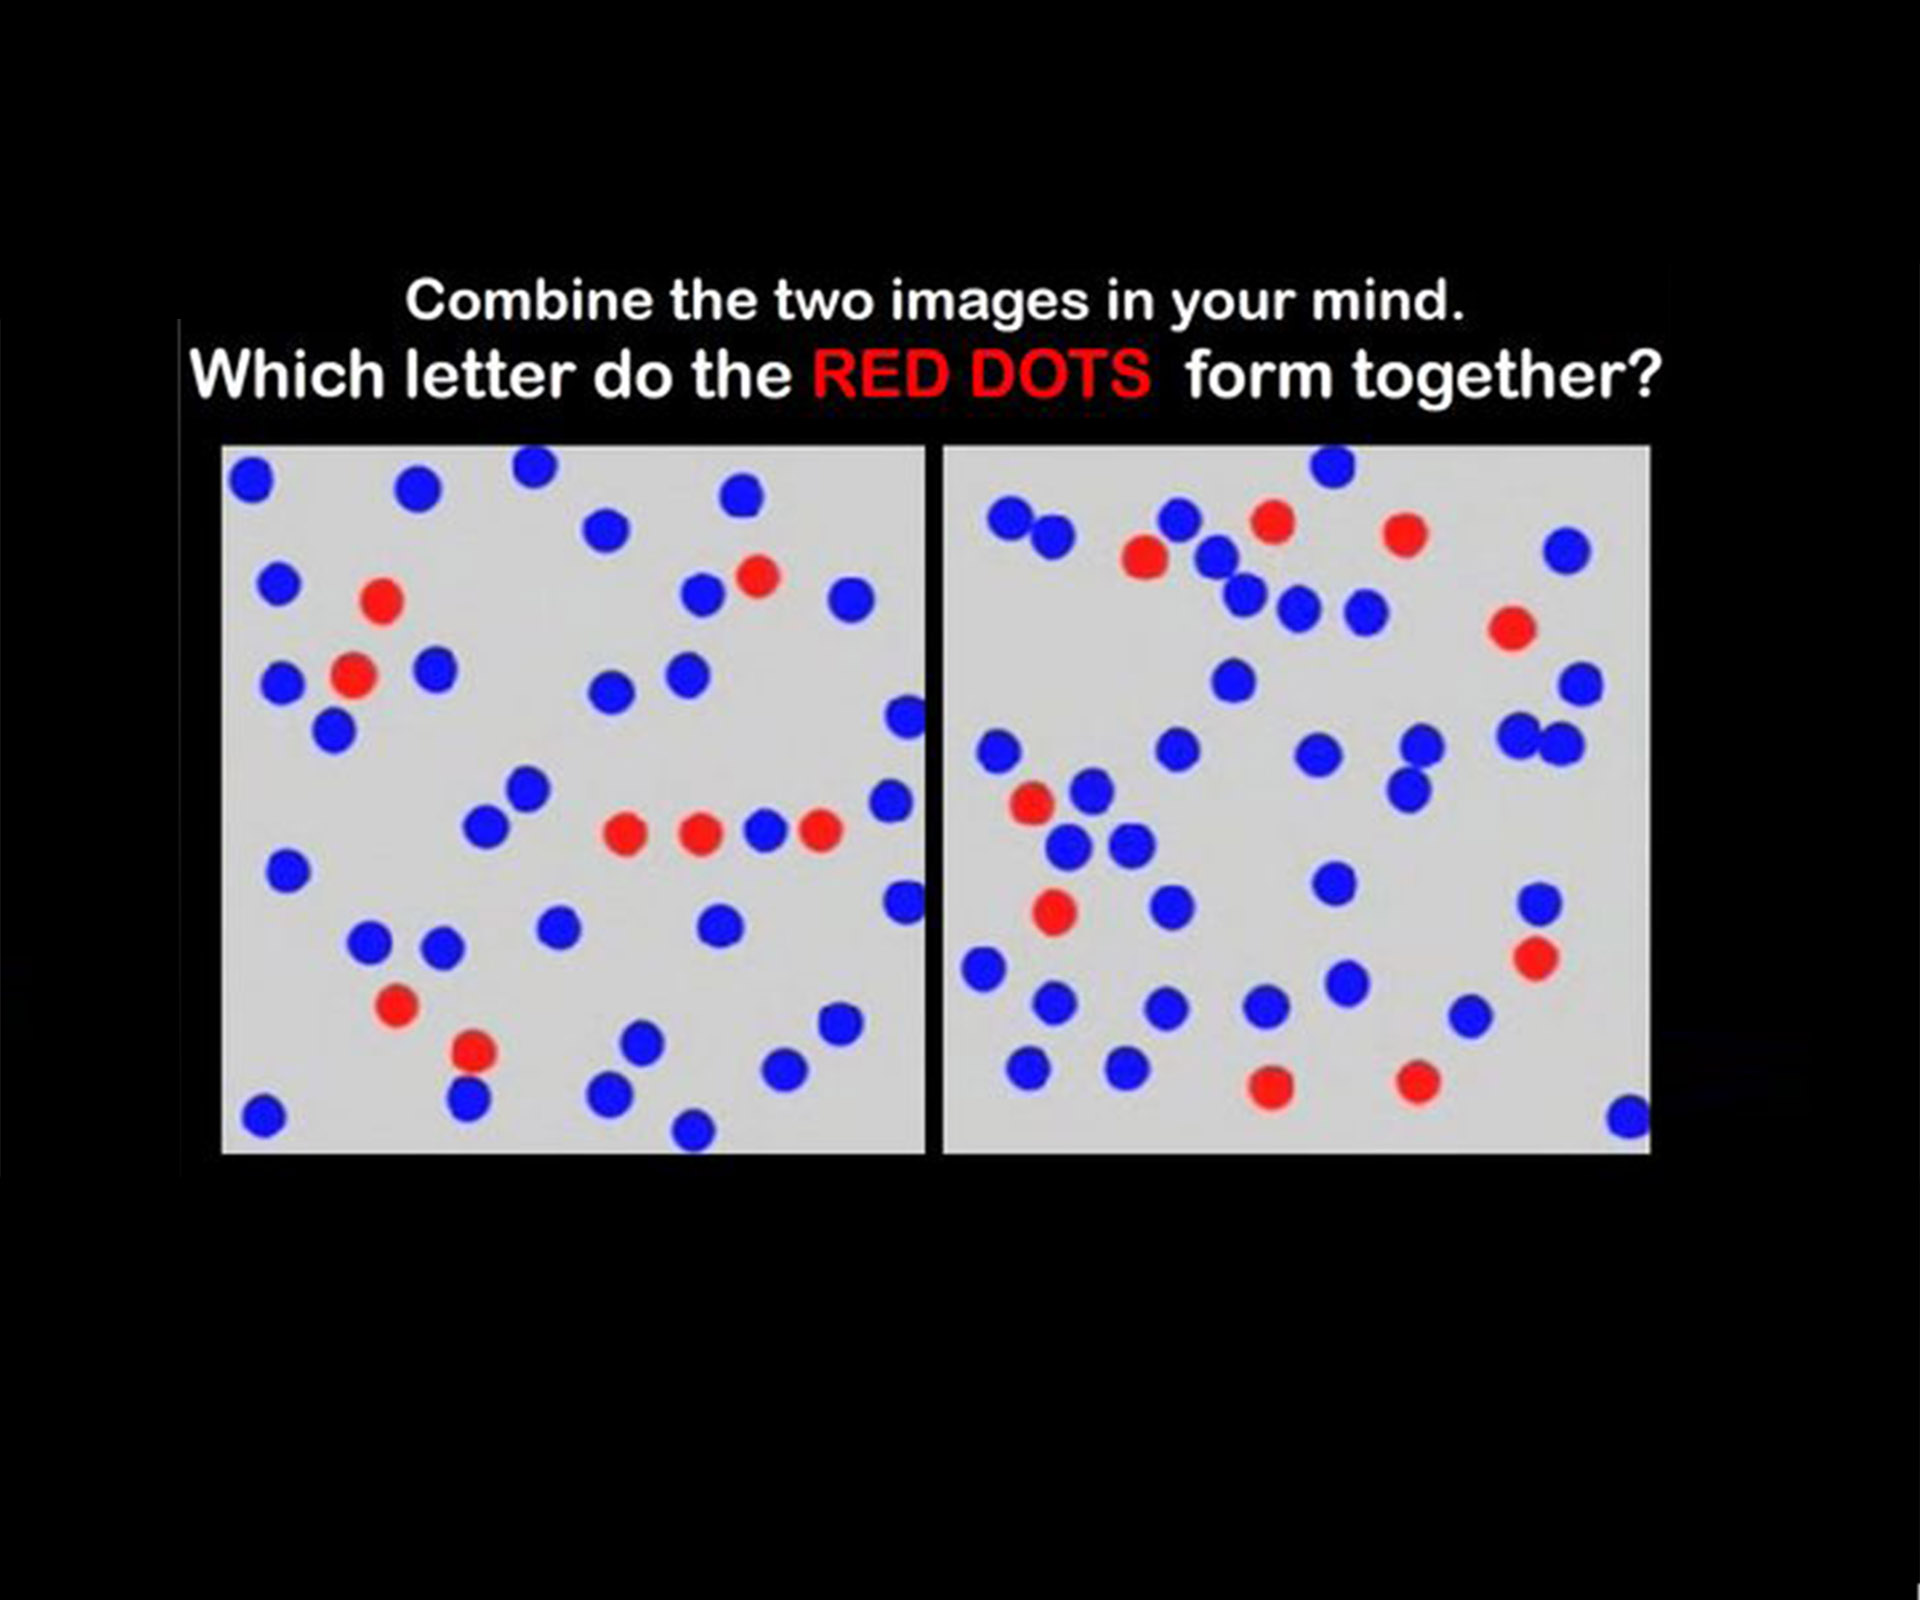 test if you have photographic memory